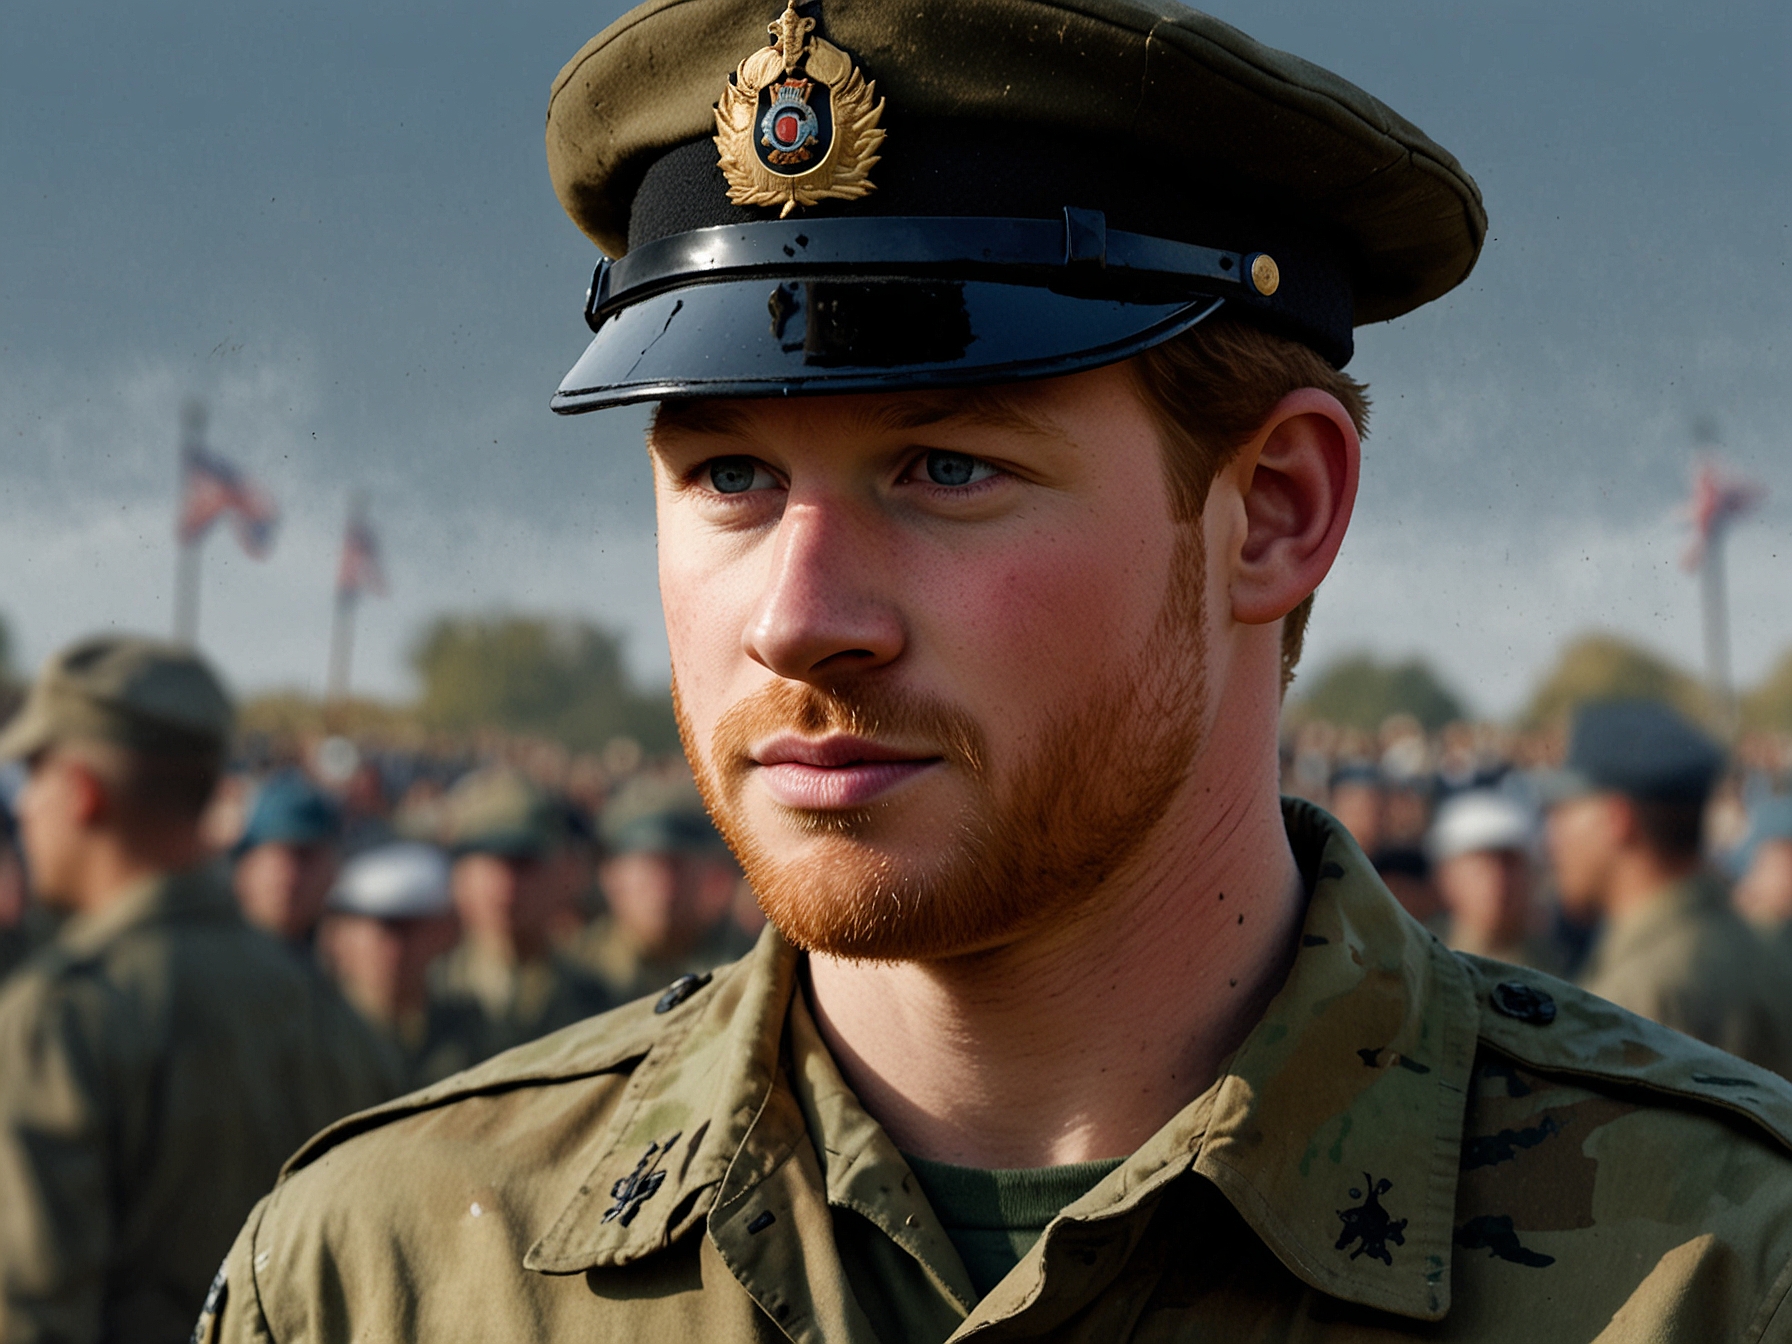 Prince Harry in military uniform attending a public event, highlighting his decade-long service in the British Army and his two tours in Afghanistan, underscoring his commitment to service.